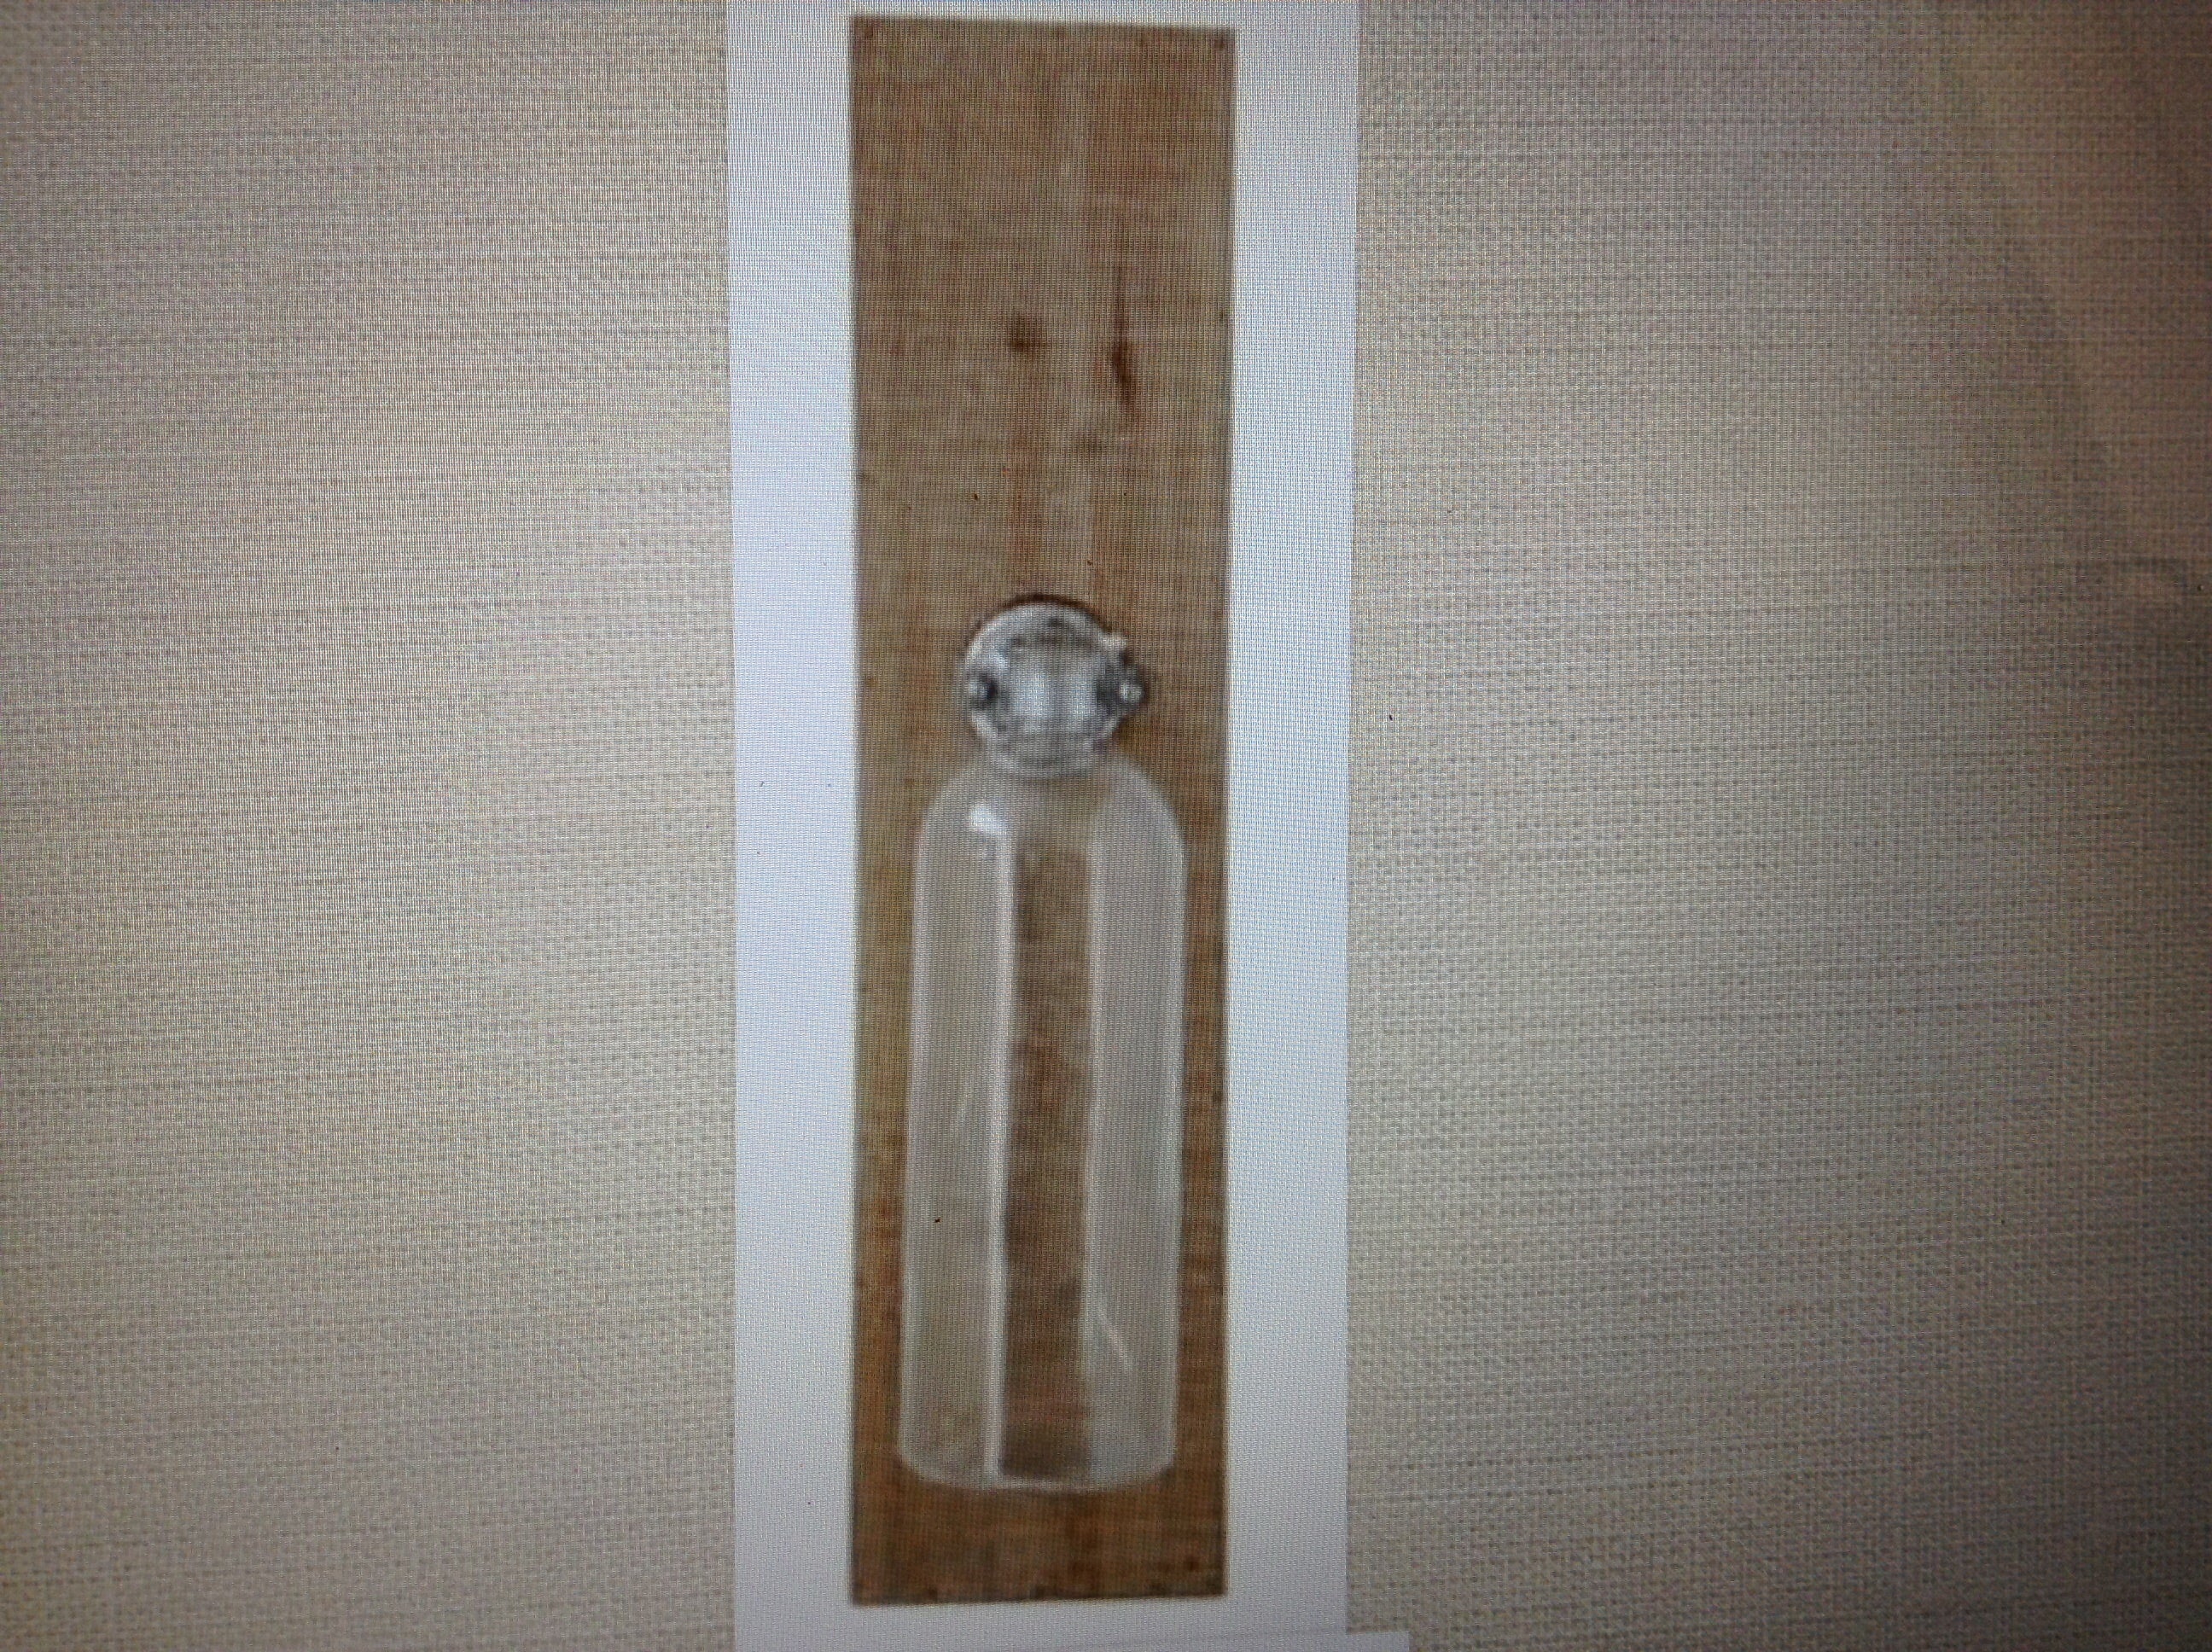 Wood with wall vase